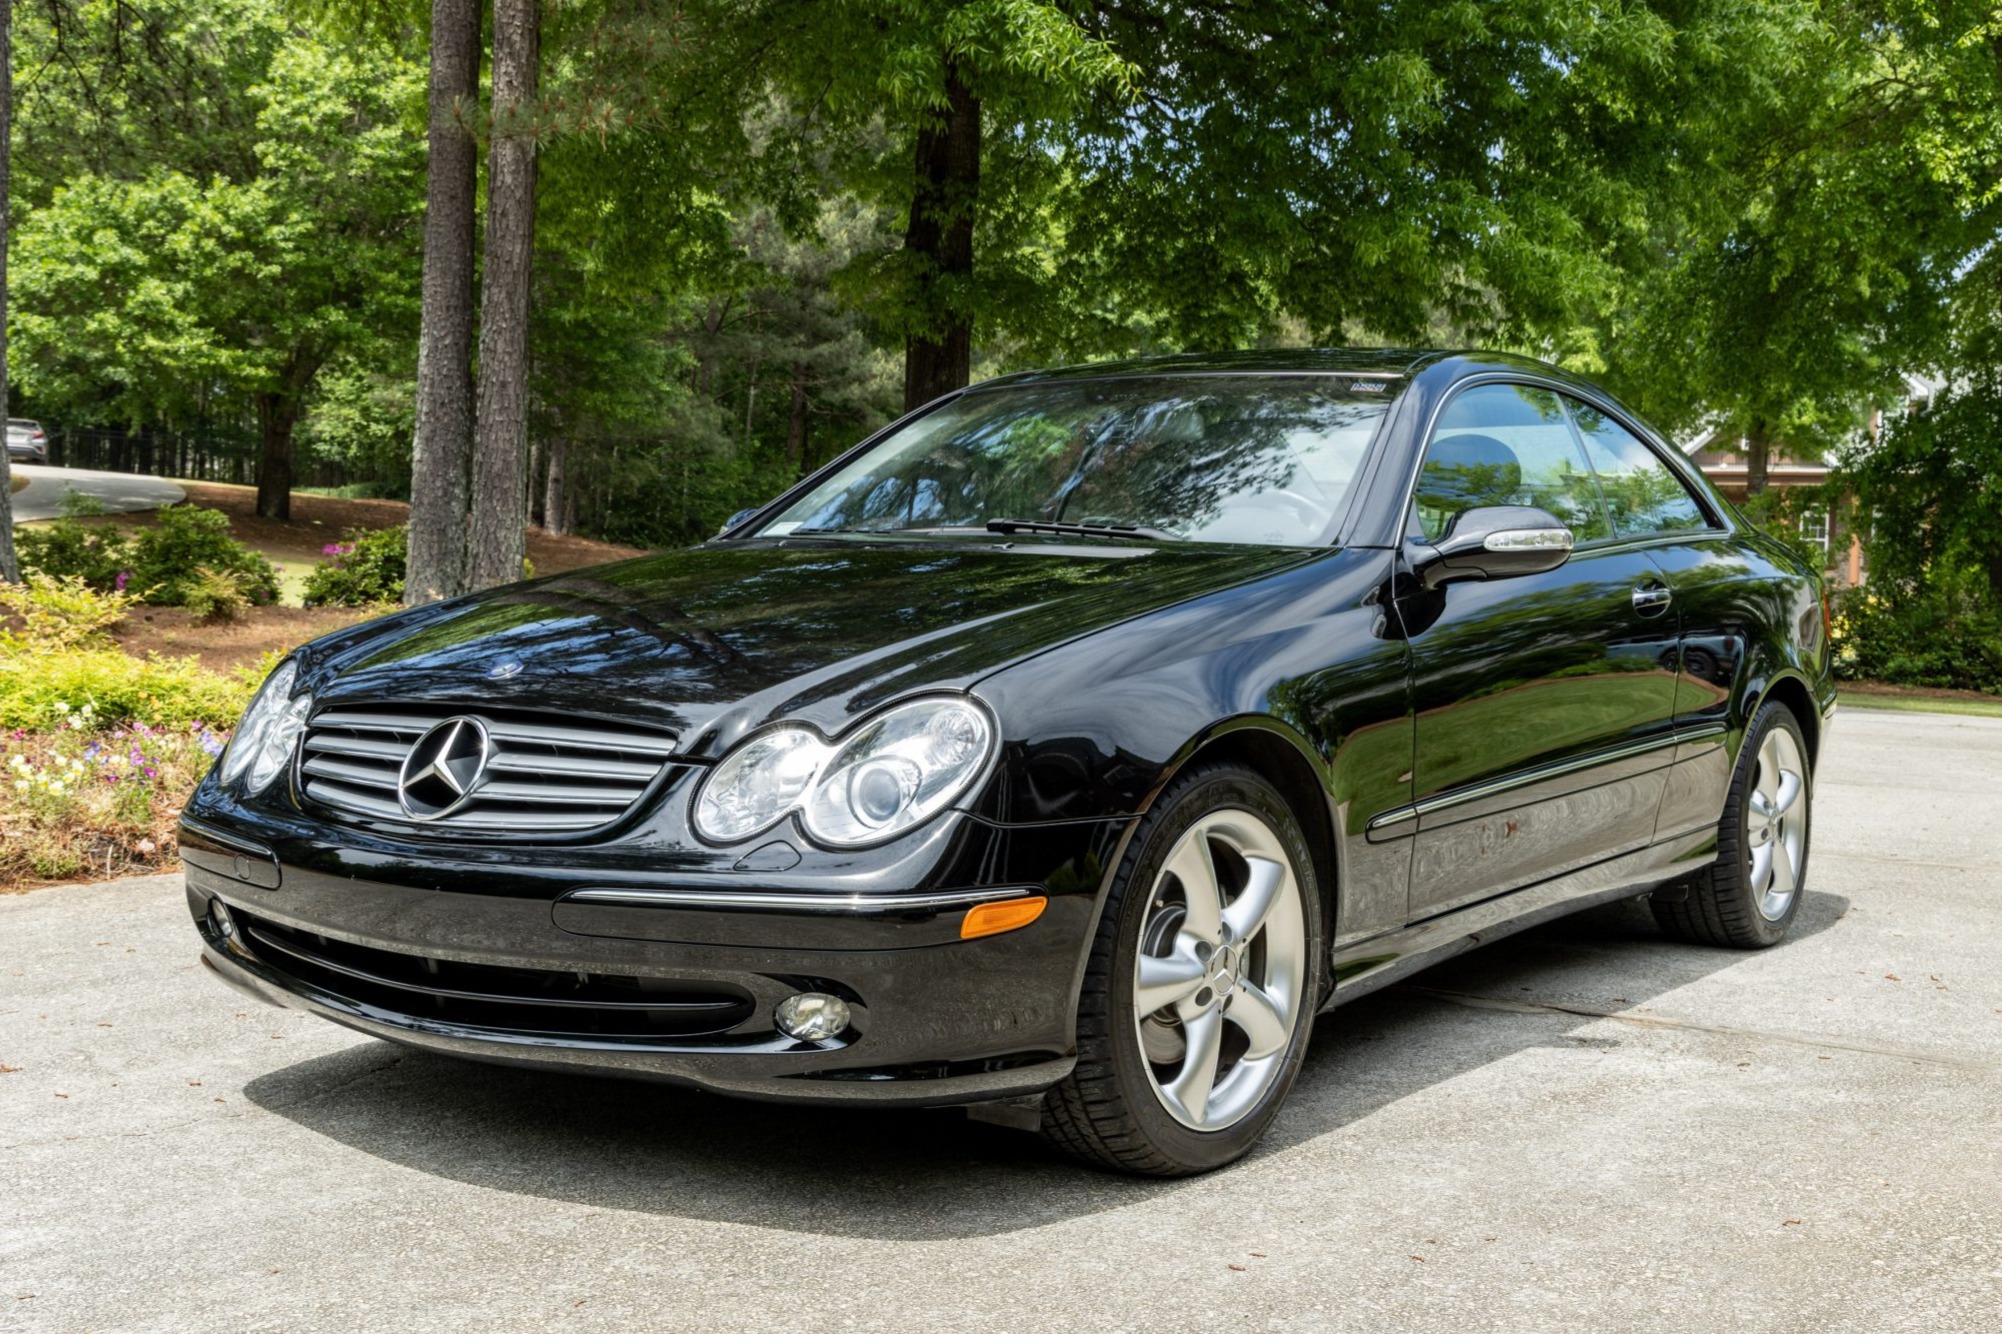 Used 18k-Mile 2003 Mercedes-Benz CLK320 Coupe Review